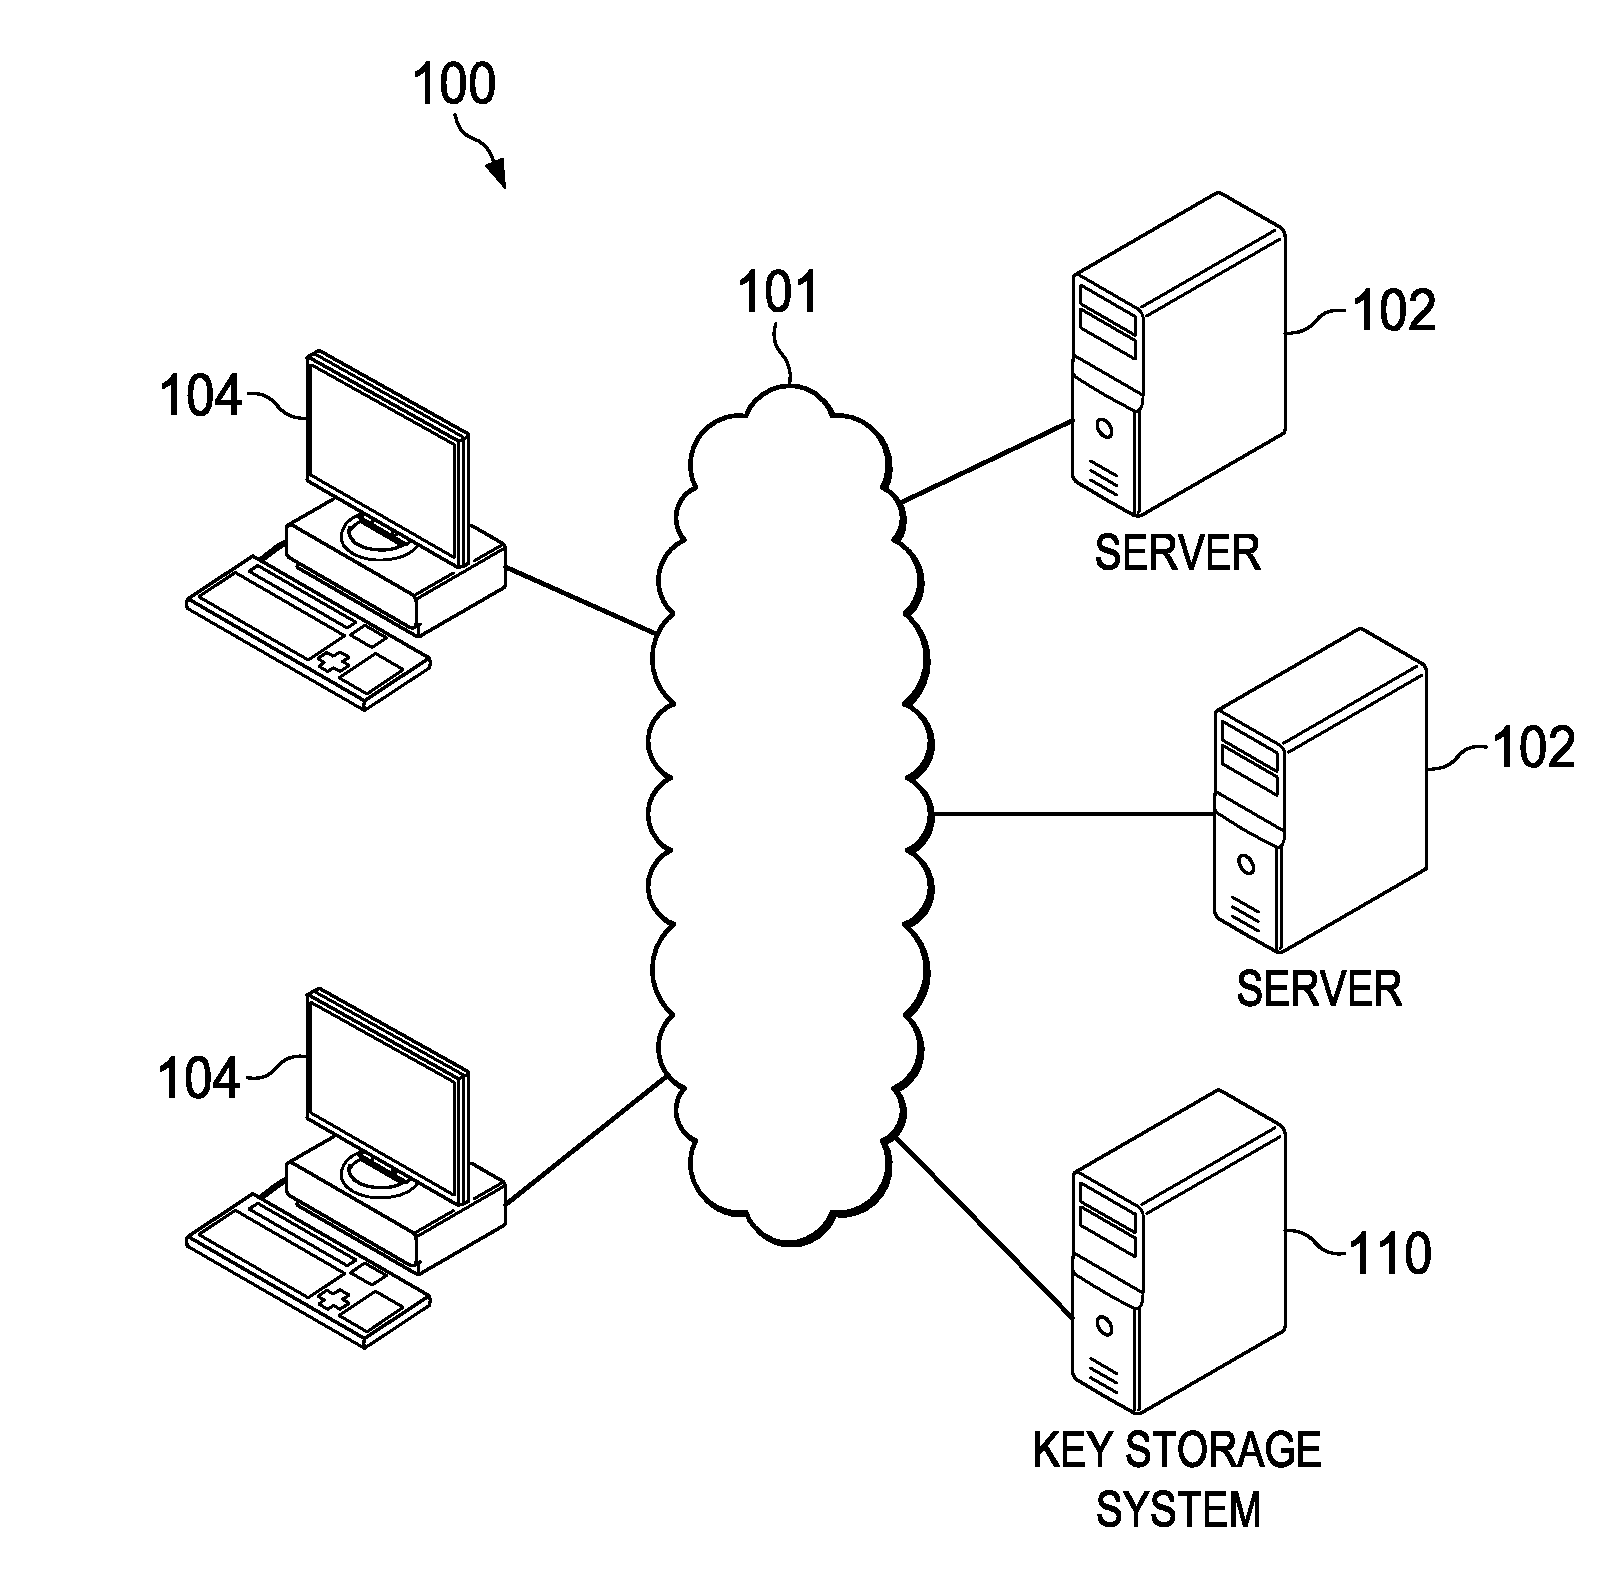 System and method for controlling access to decrypted data